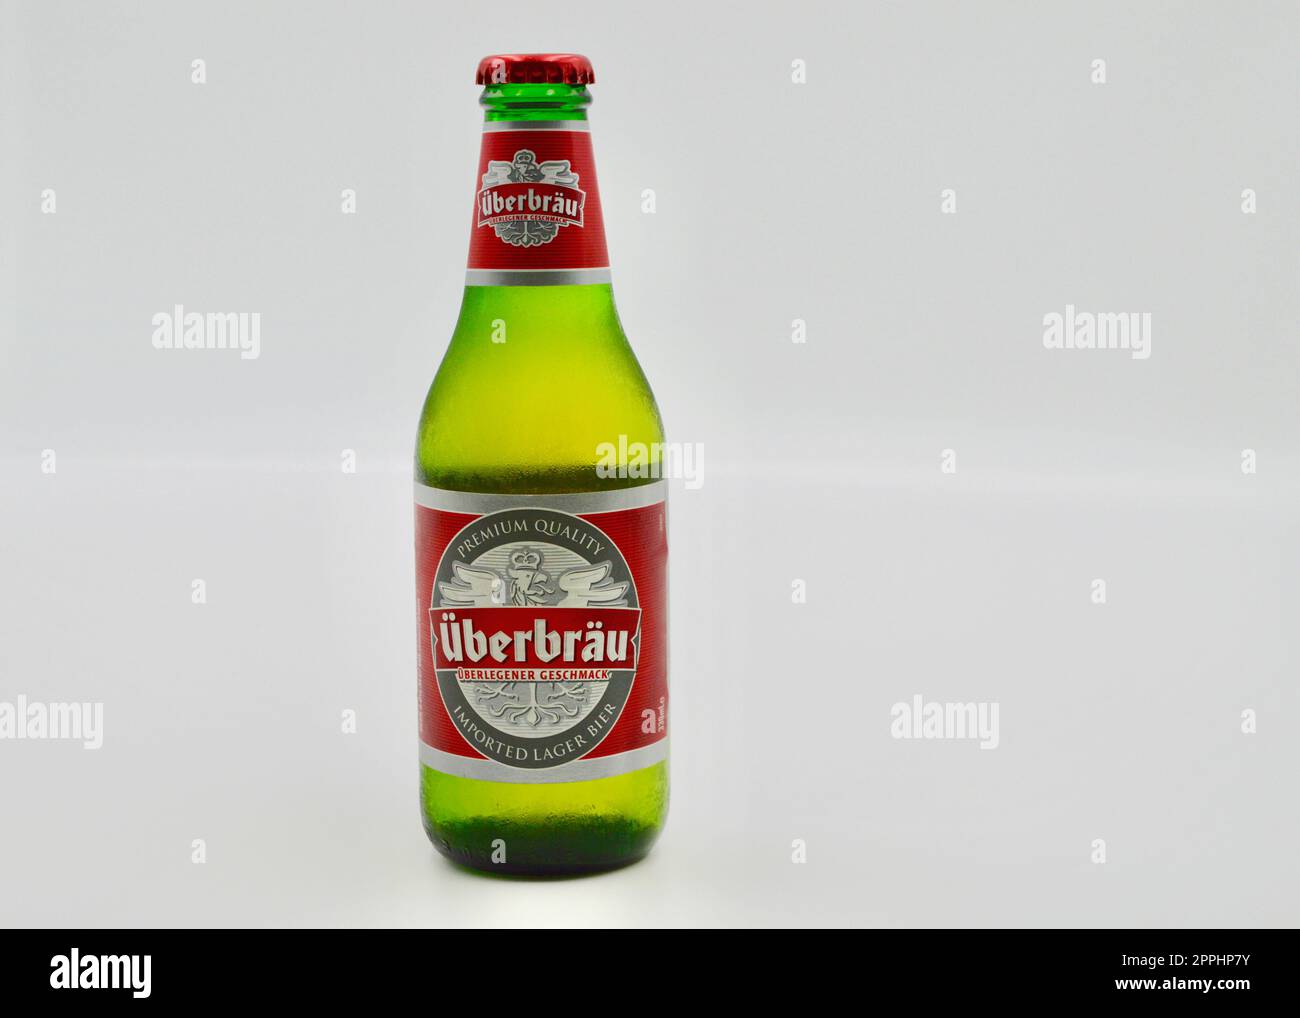 A closeup of a bottle of Uberbrau Premium lager against a white background Stock Photo